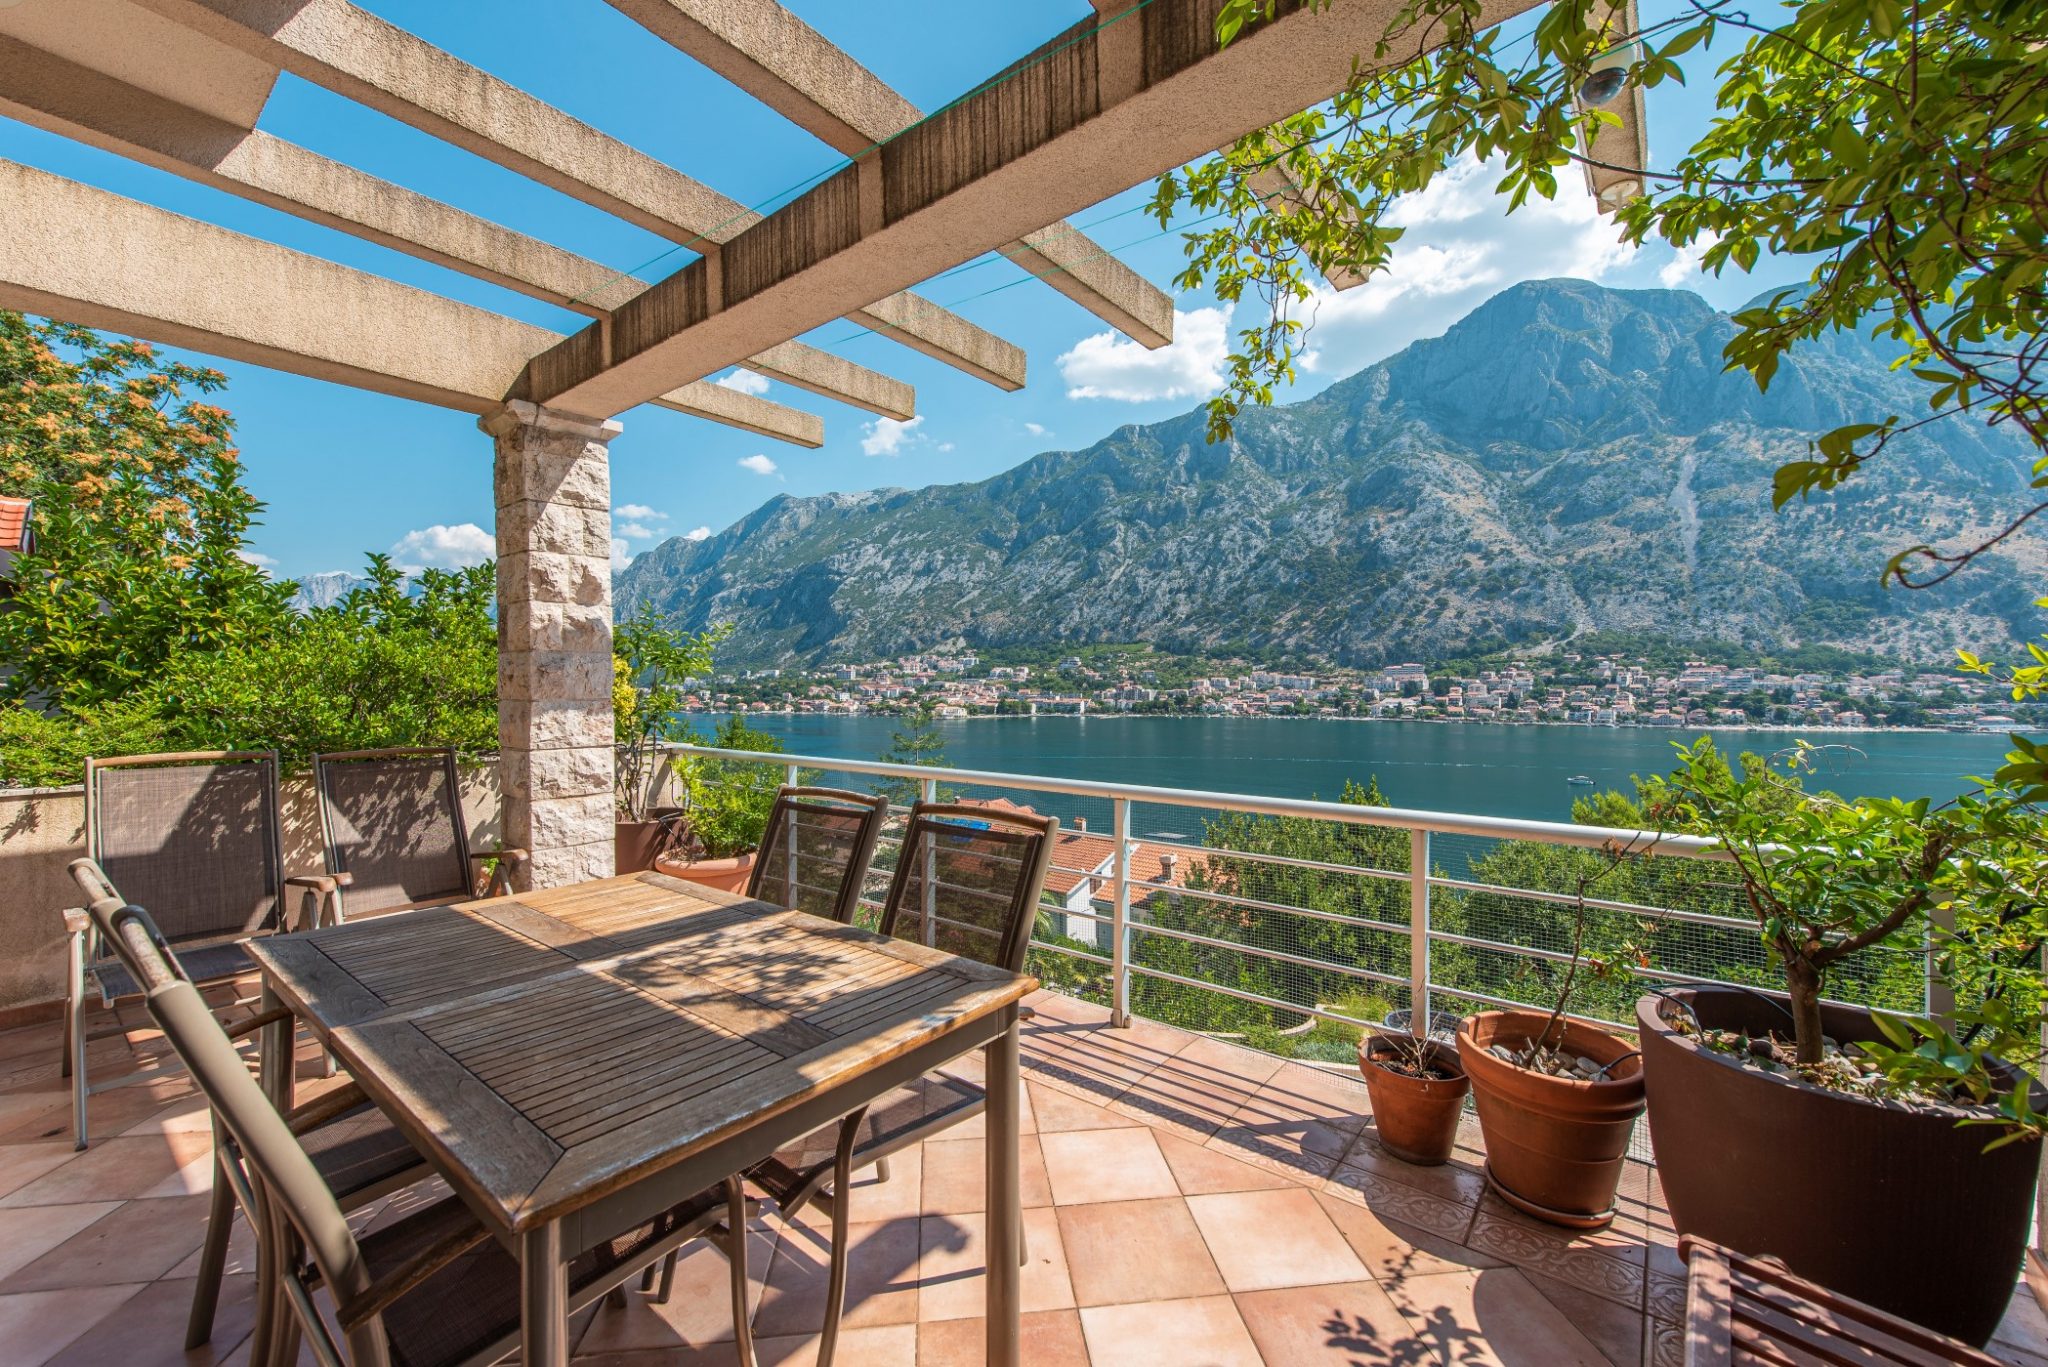 Kotor, Muo - two-bedroom duplex apartment within a complex with a swimming pool